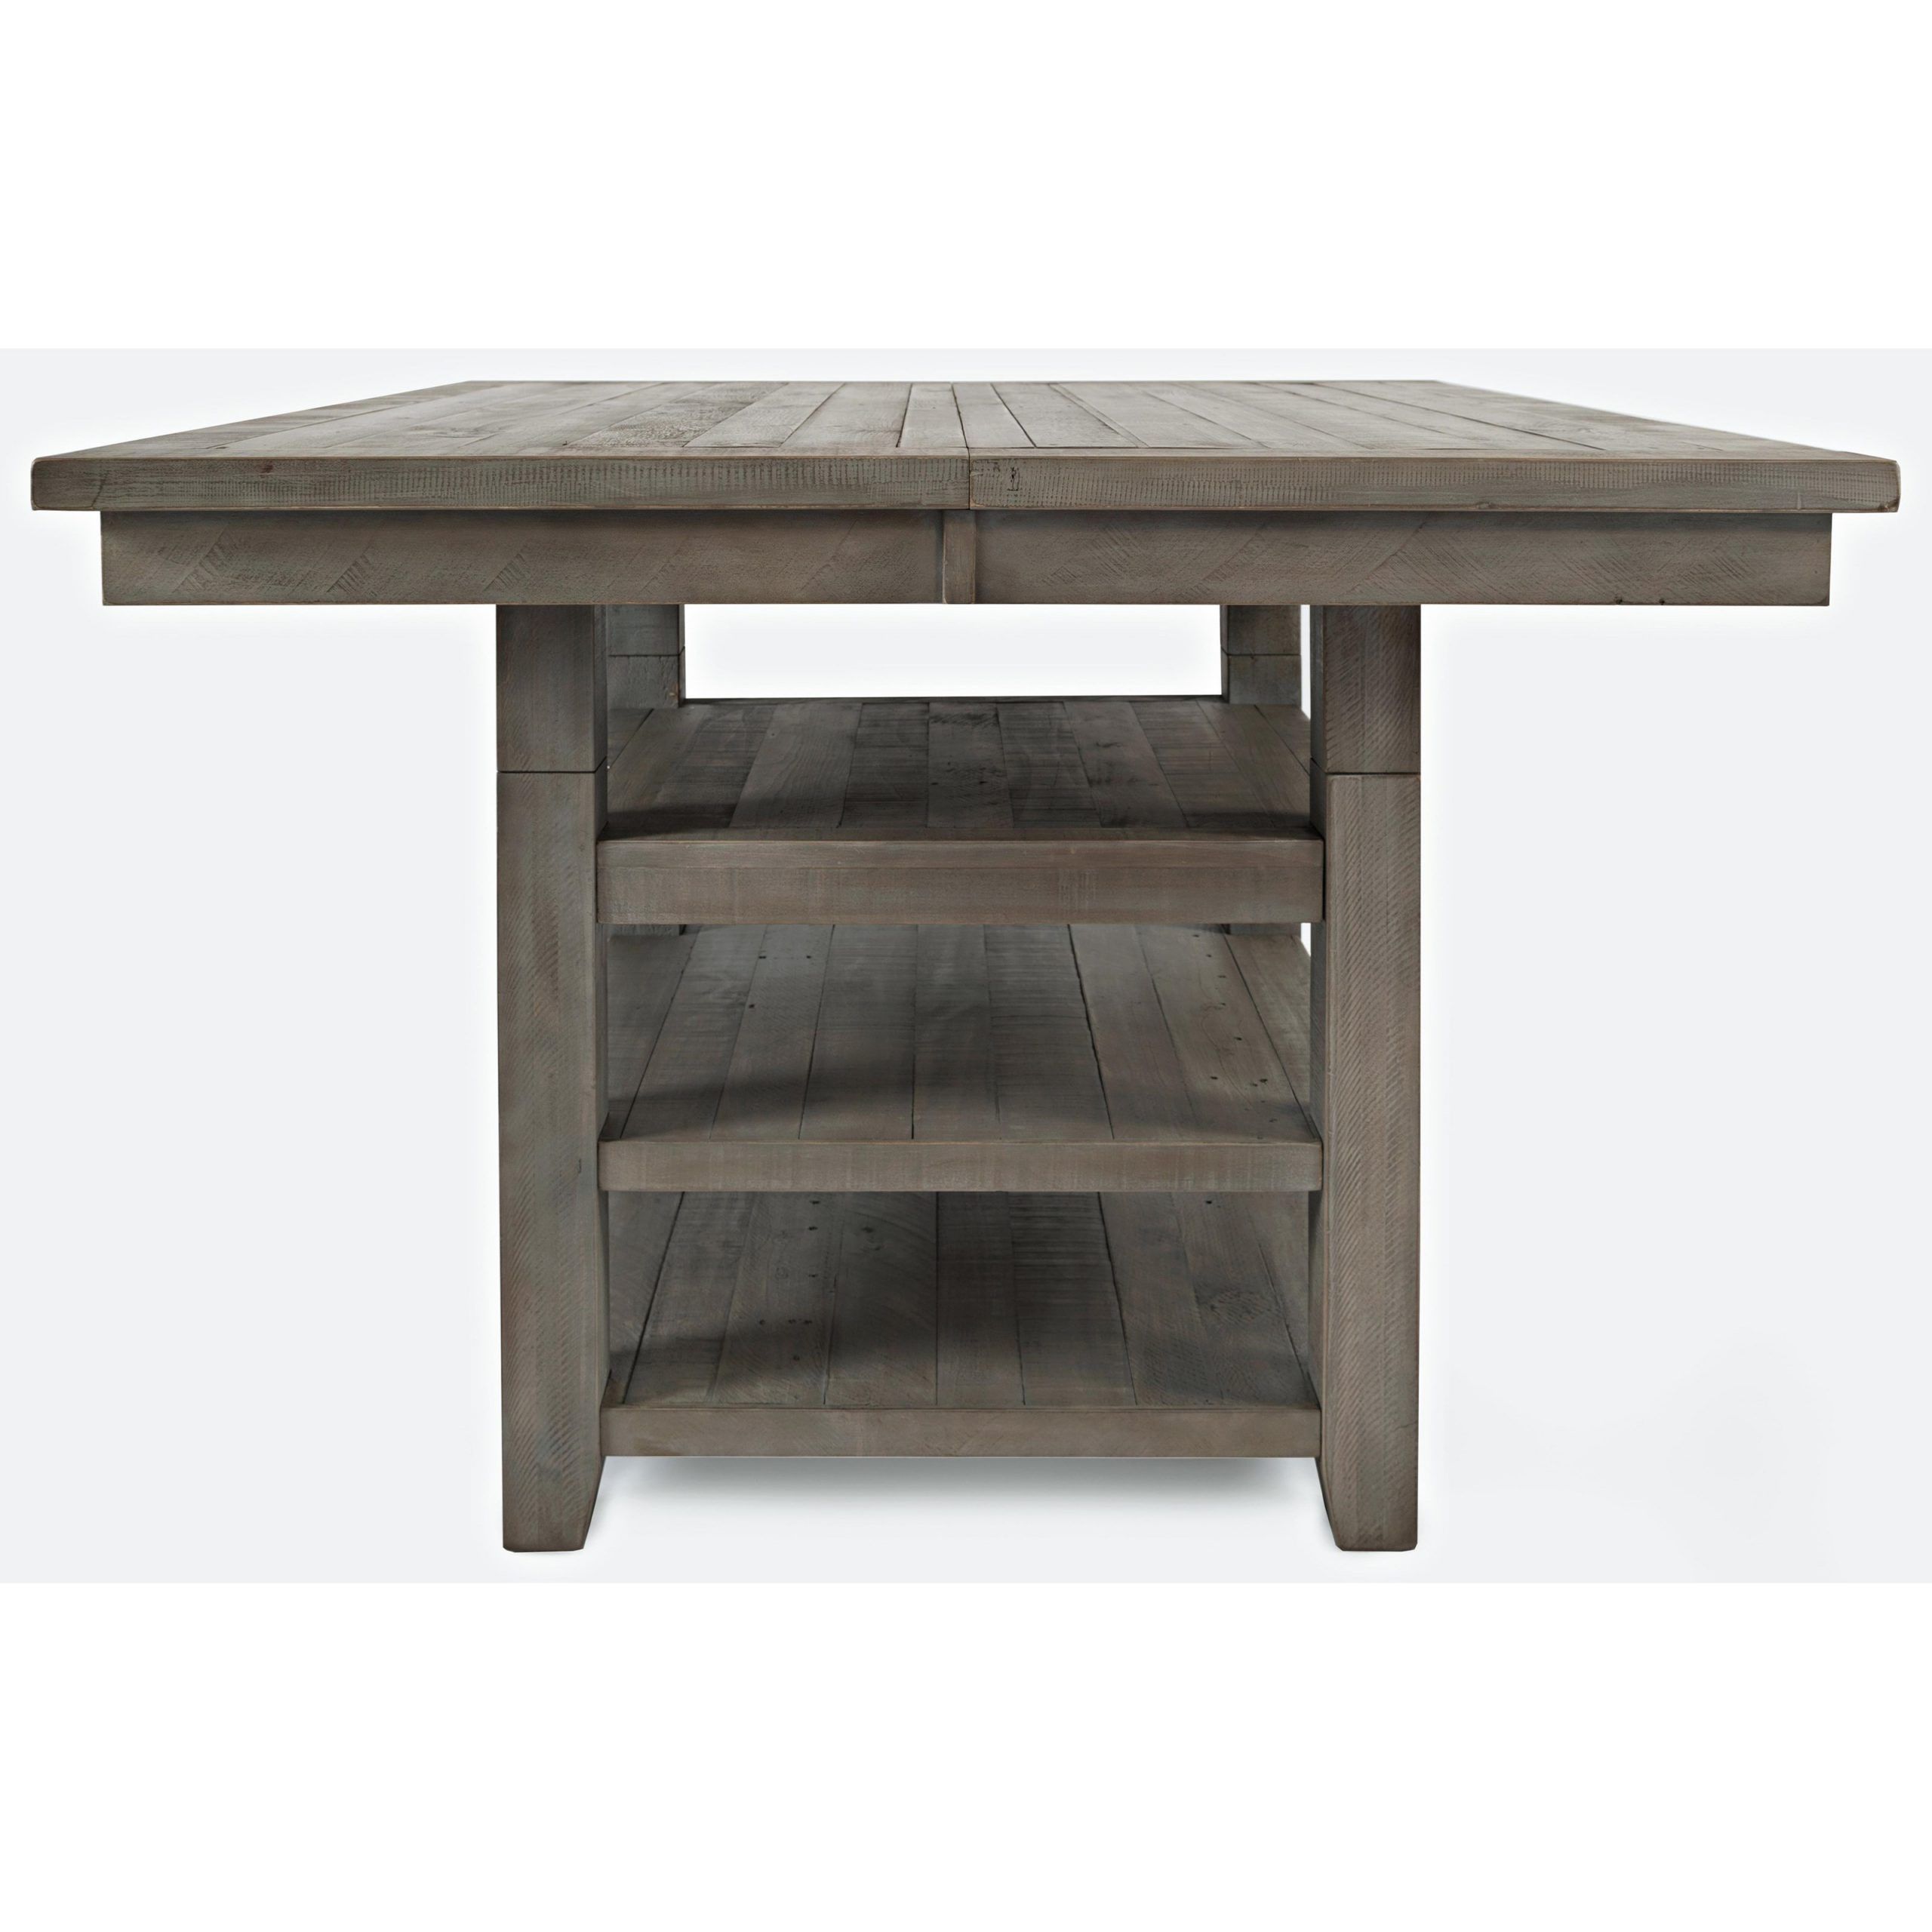 Gray Wash Banks Pedestal Extending Dining Tables Regarding Most Popular Jofran Outer Banks Hi/low Square Storage Dining Table (View 19 of 25)